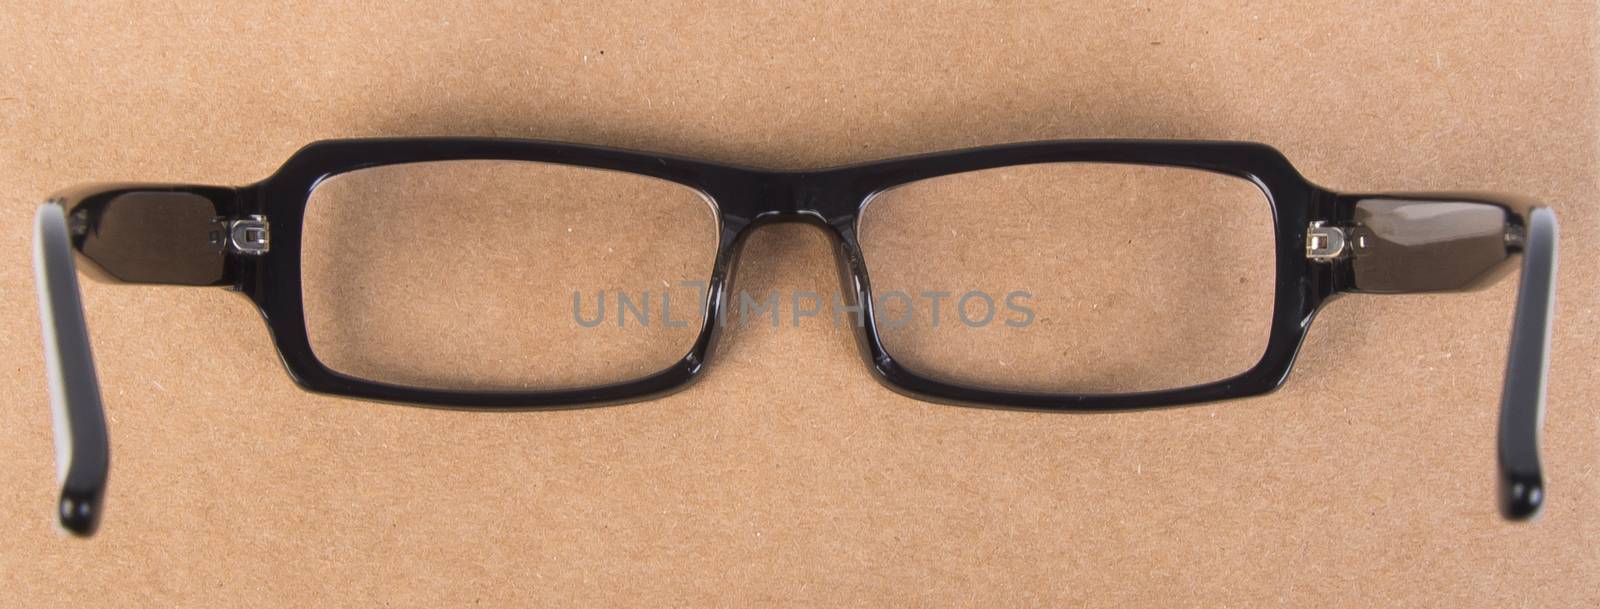 eye glasses. eye glasses with book on background